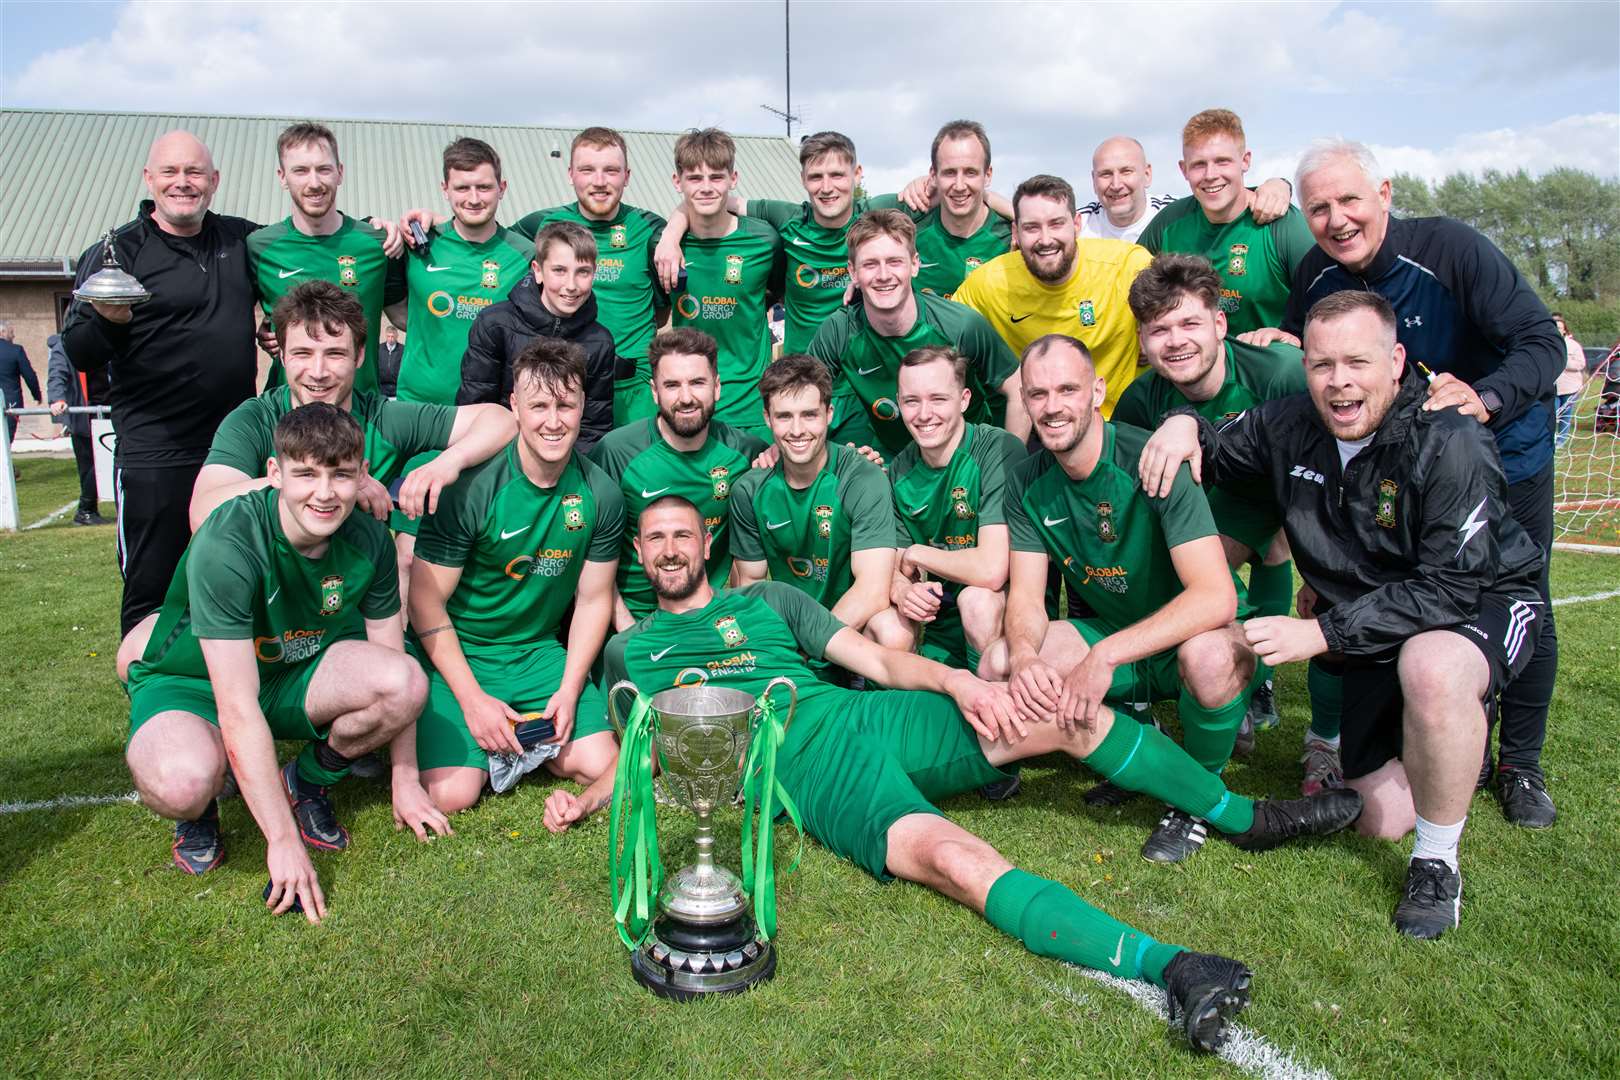 Dufftown celebrate their Elginshire Cup success...Dufftown FC (2) vs Forres Thistle FC (2) - Dufftown FC win 5-3 on penalties - Elginshire Cup Final held at Logie Park, Forres 14/05/2022...Picture: Daniel Forsyth..